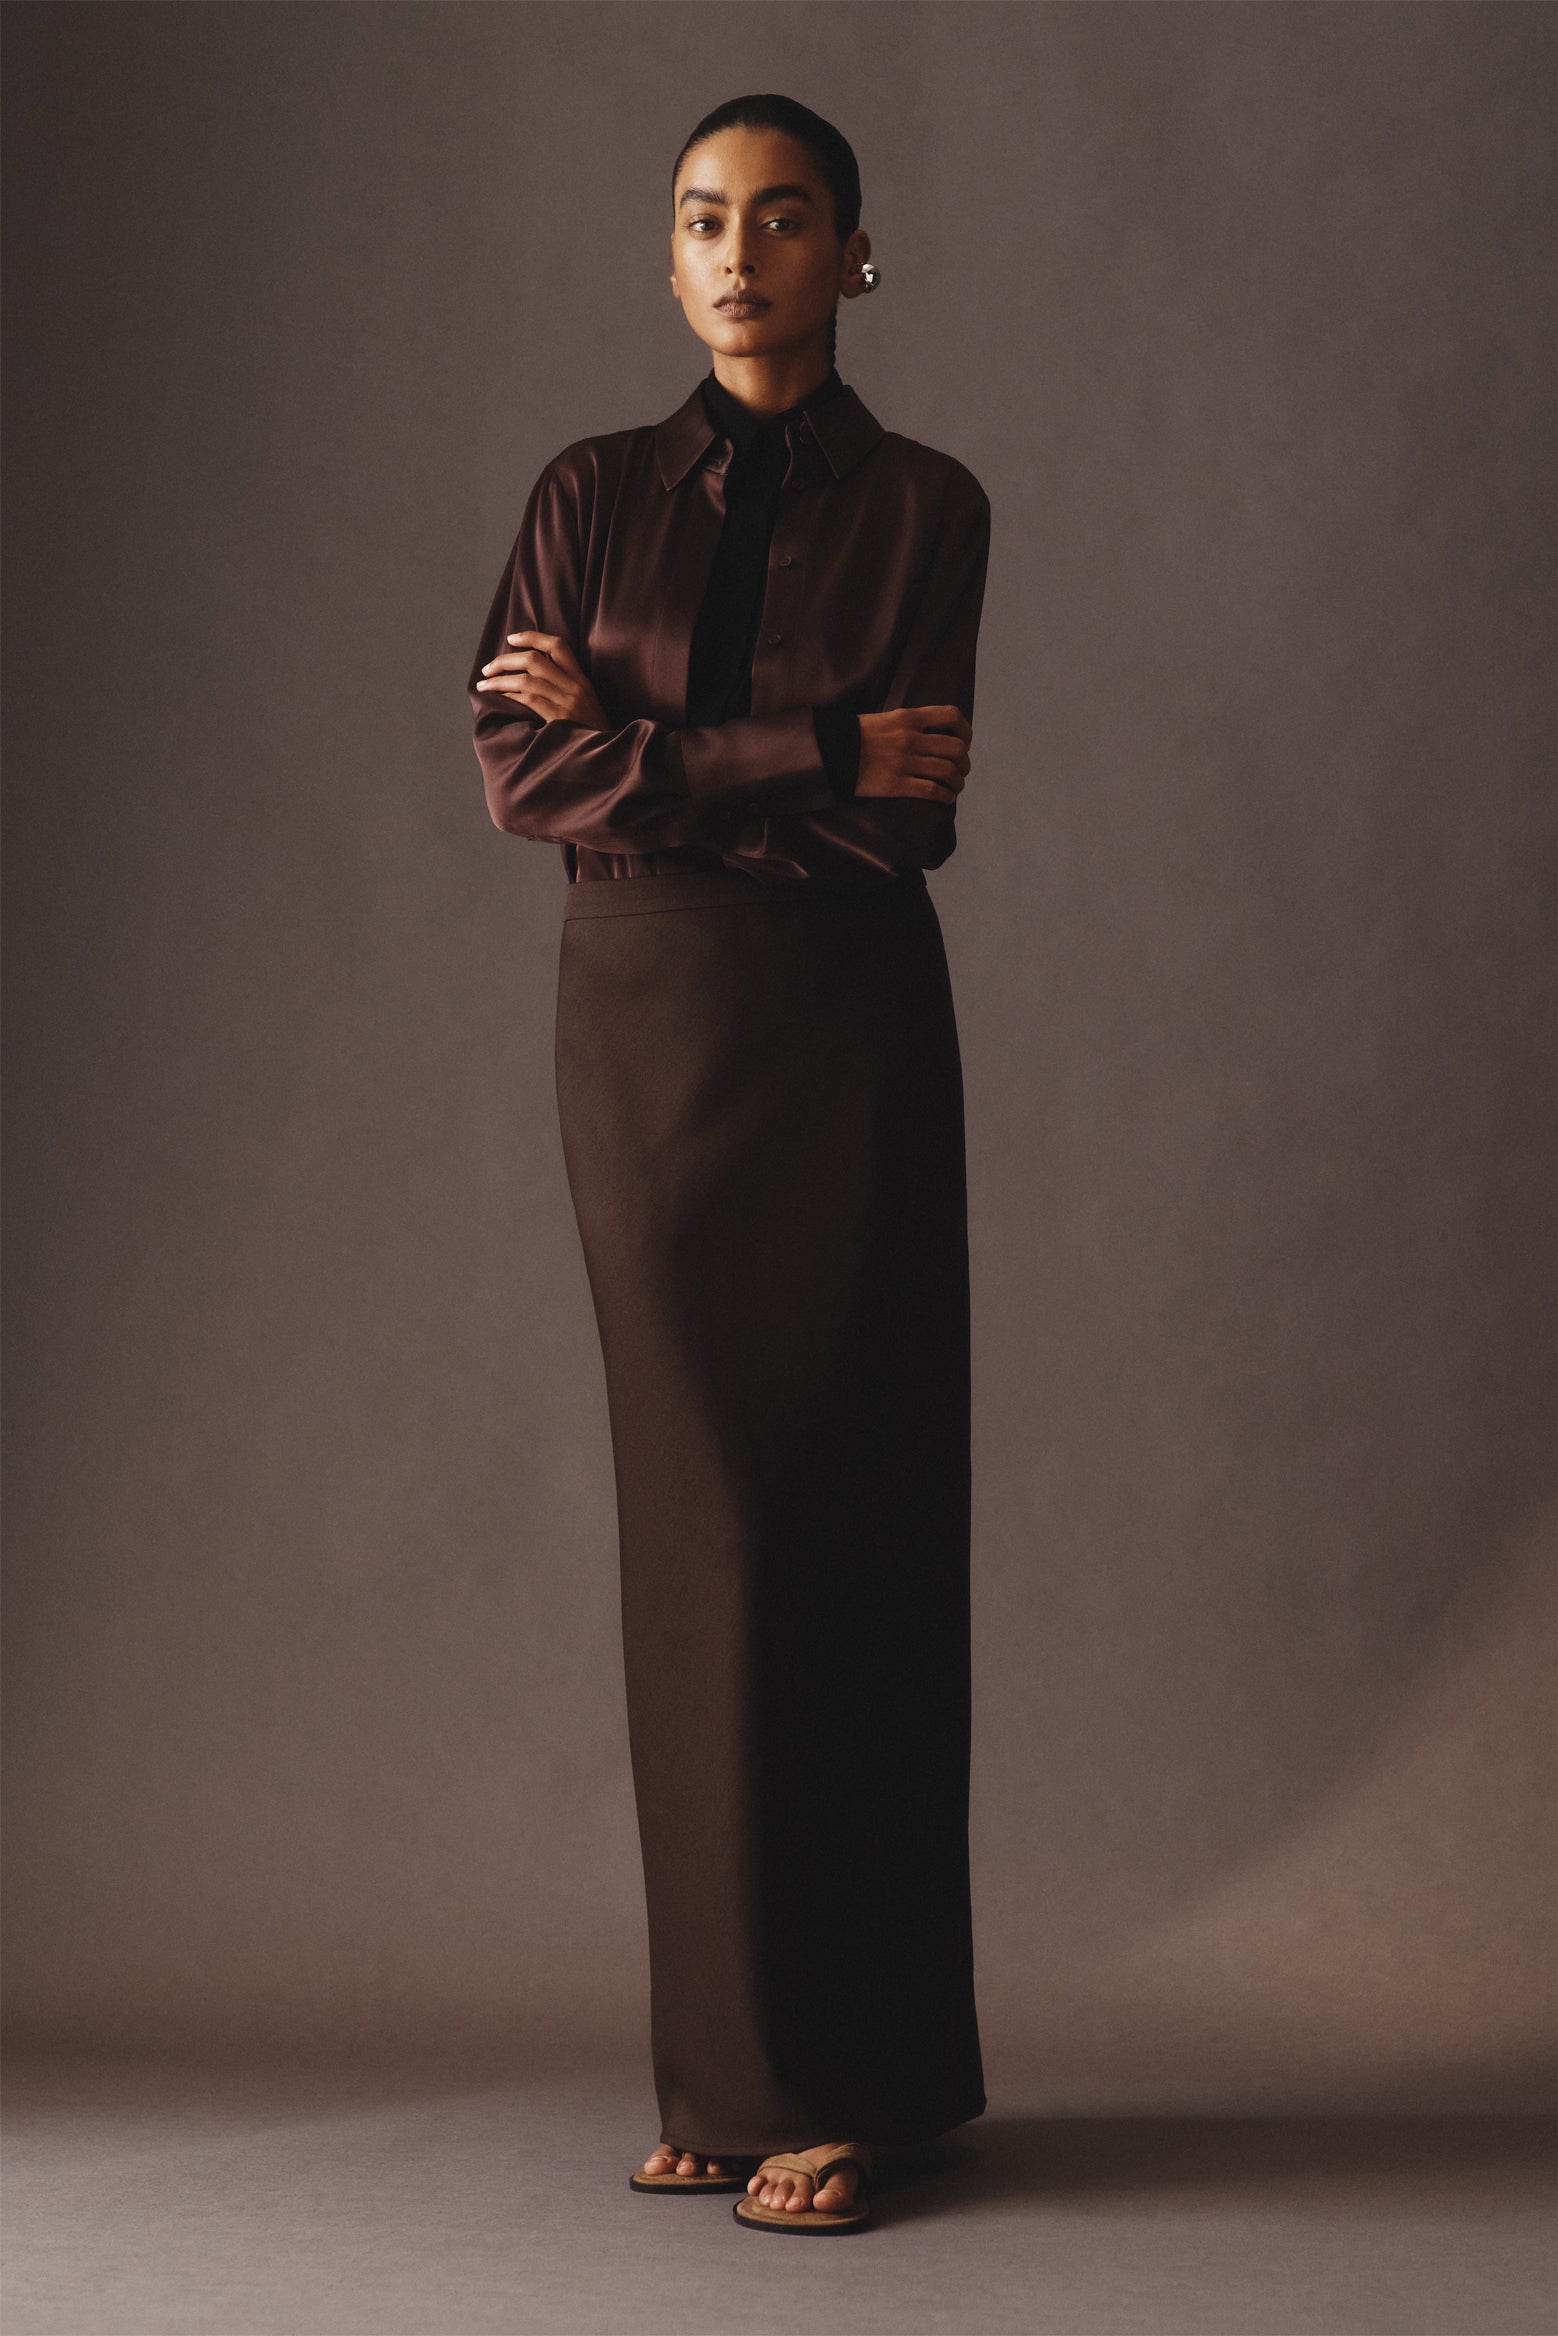 The A.EMERY Philippa Shirt in Chocolate available at The New Trend.